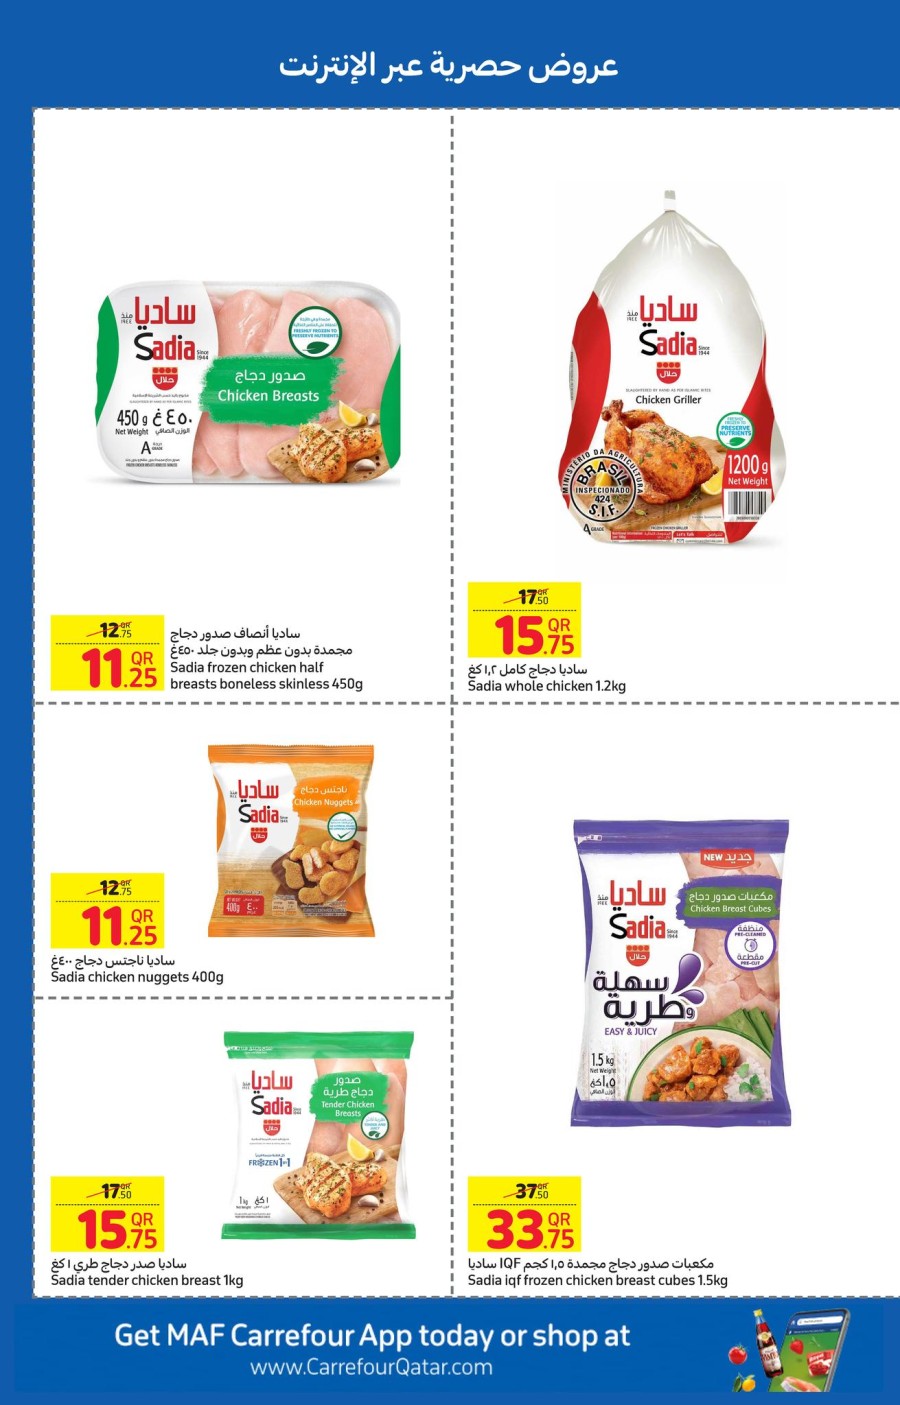 Carrefour Online Special Offers